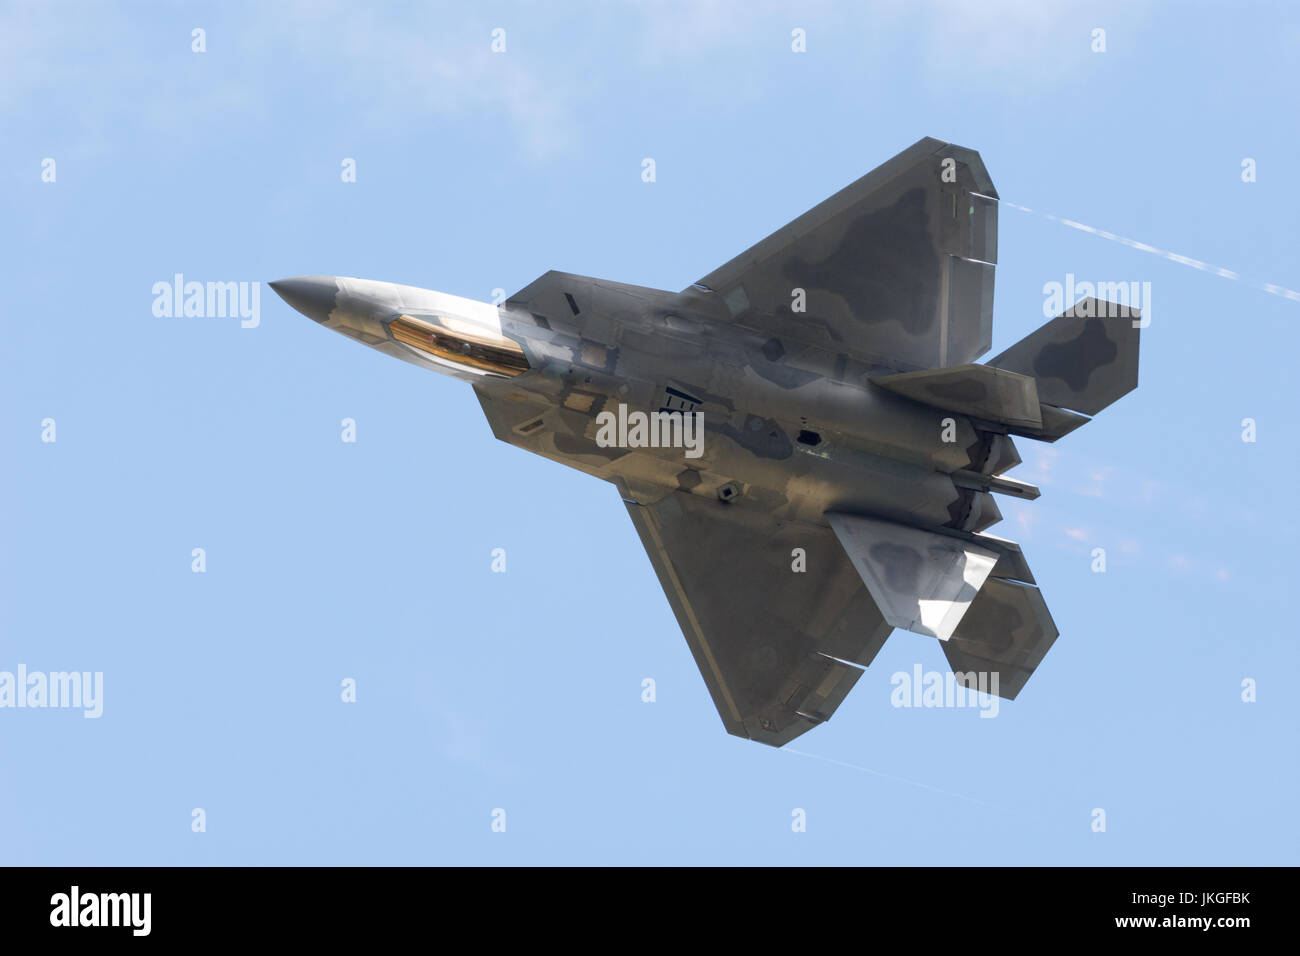 F22 RAPTOR INVERTED FAIRFORD RIAT 2017 Stock Photo